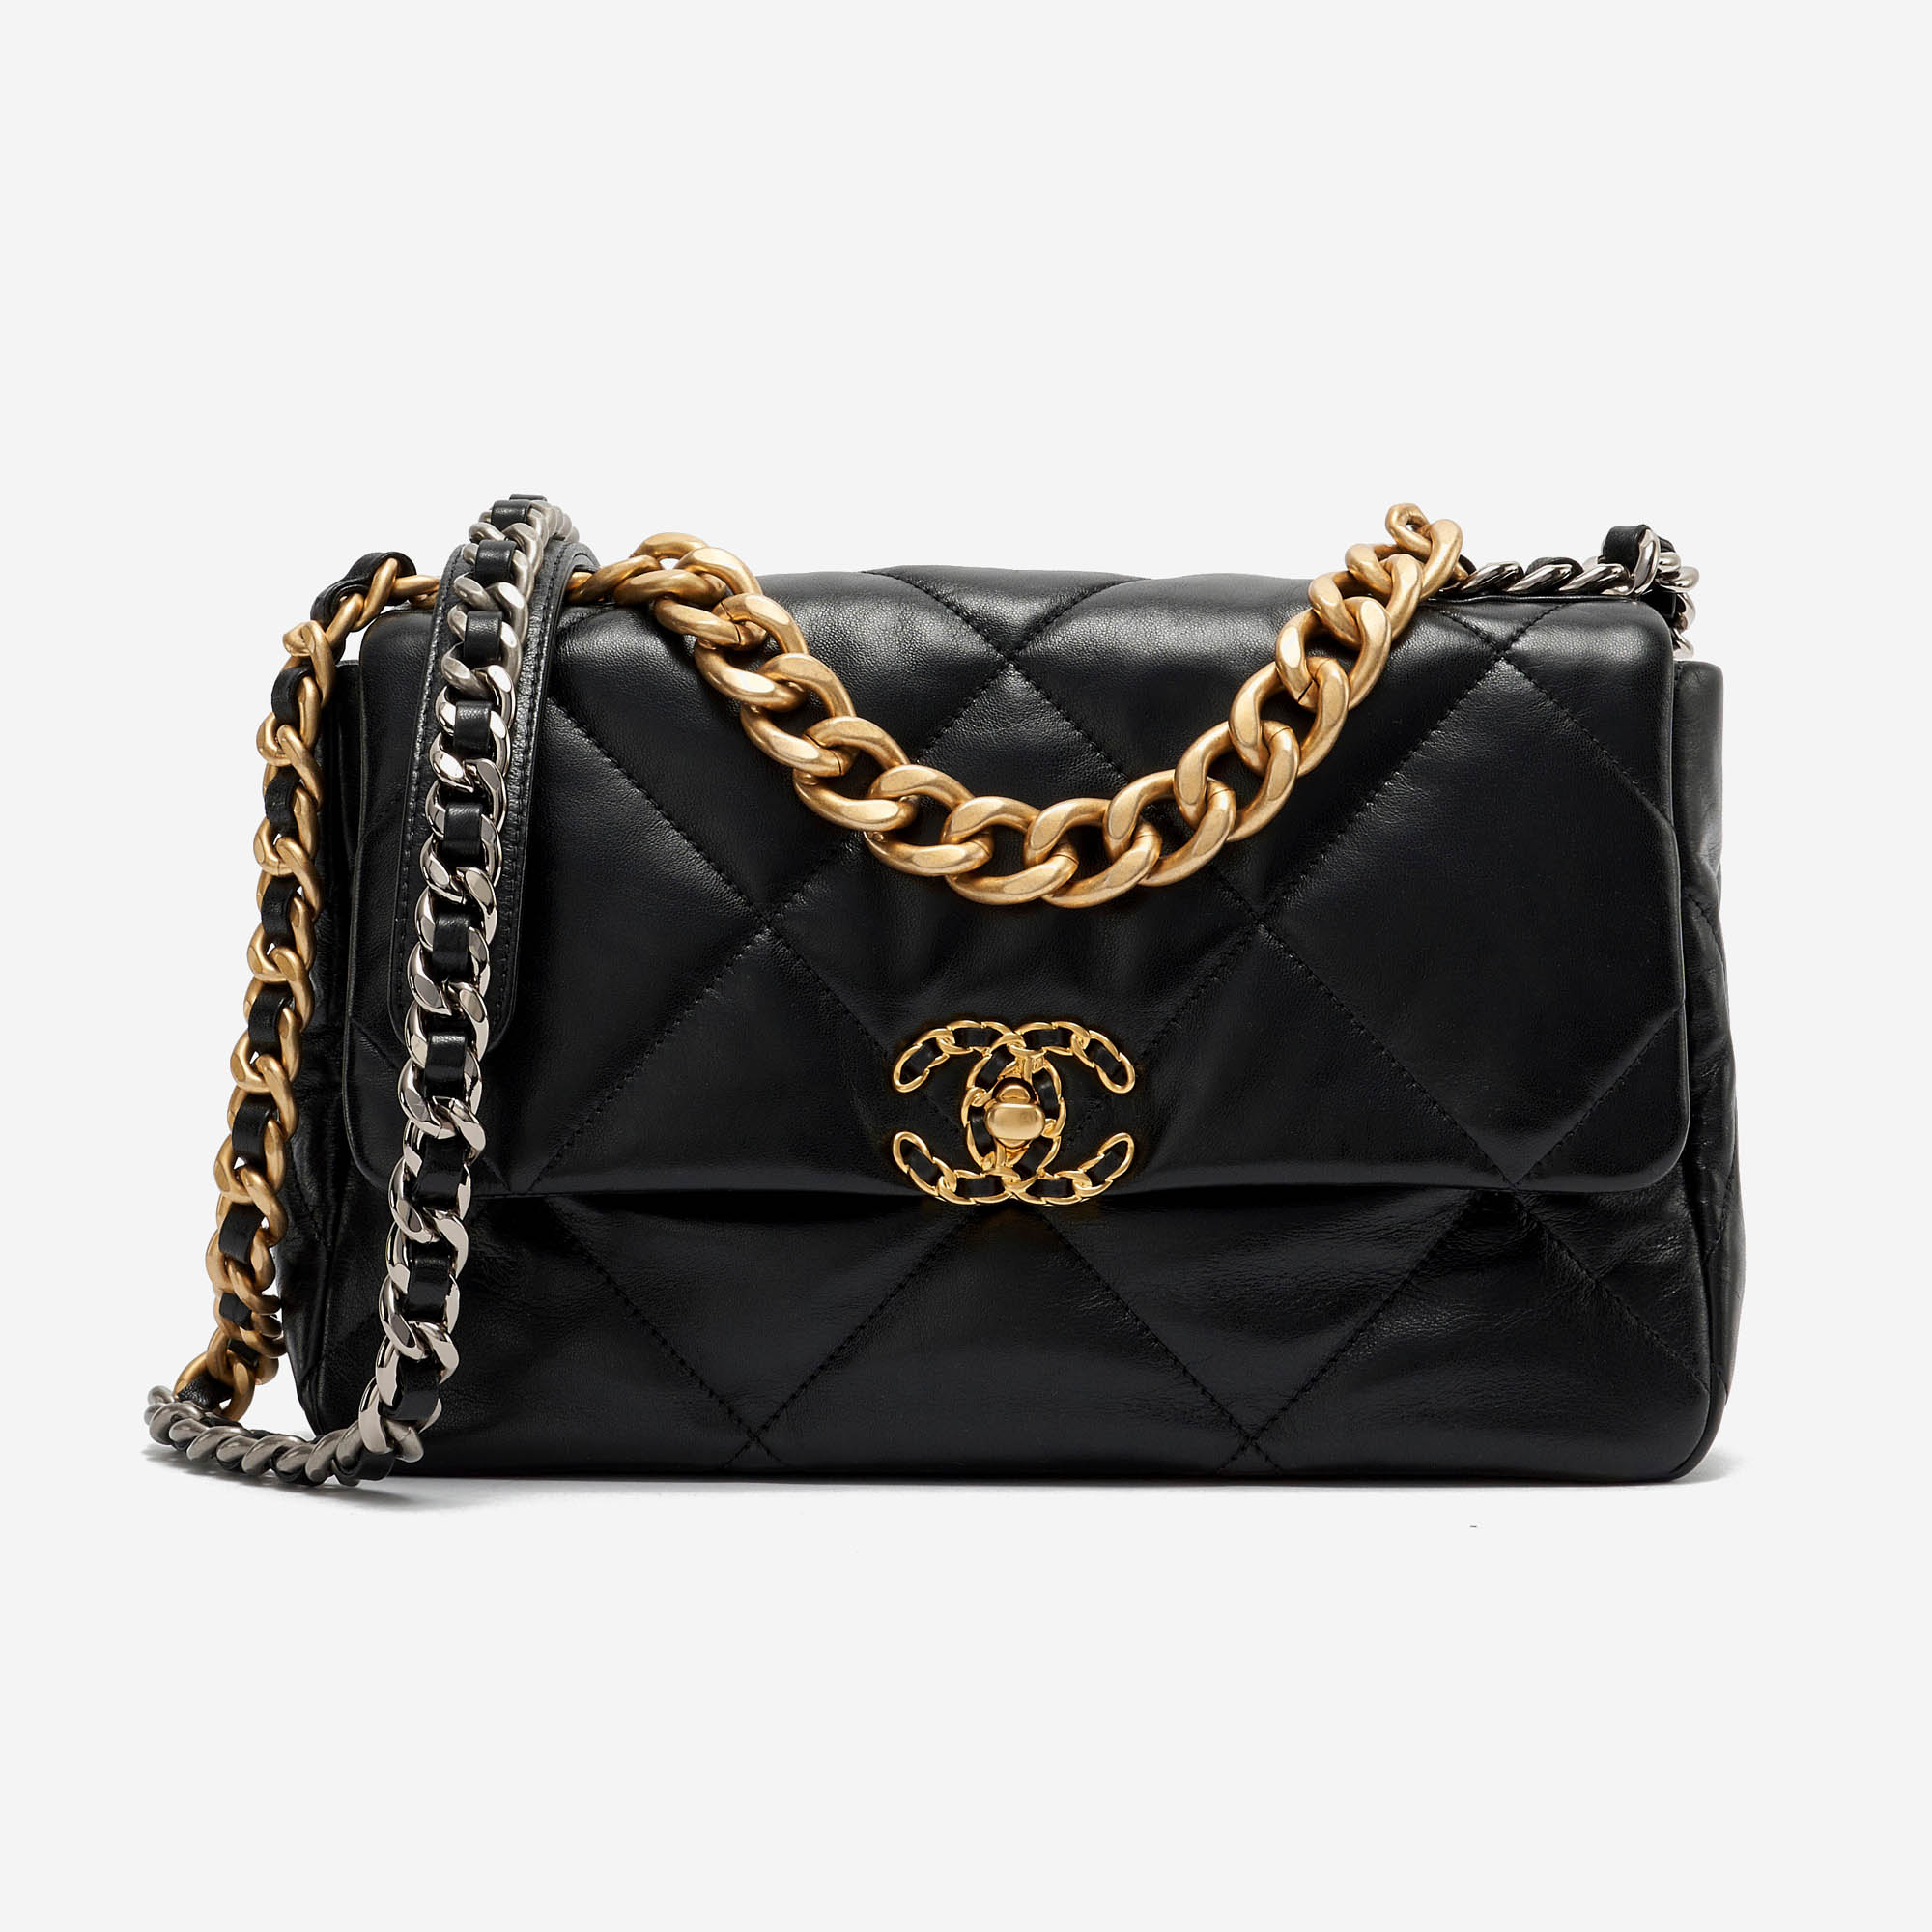 Chanel 19 Large Black, New in Dustbag